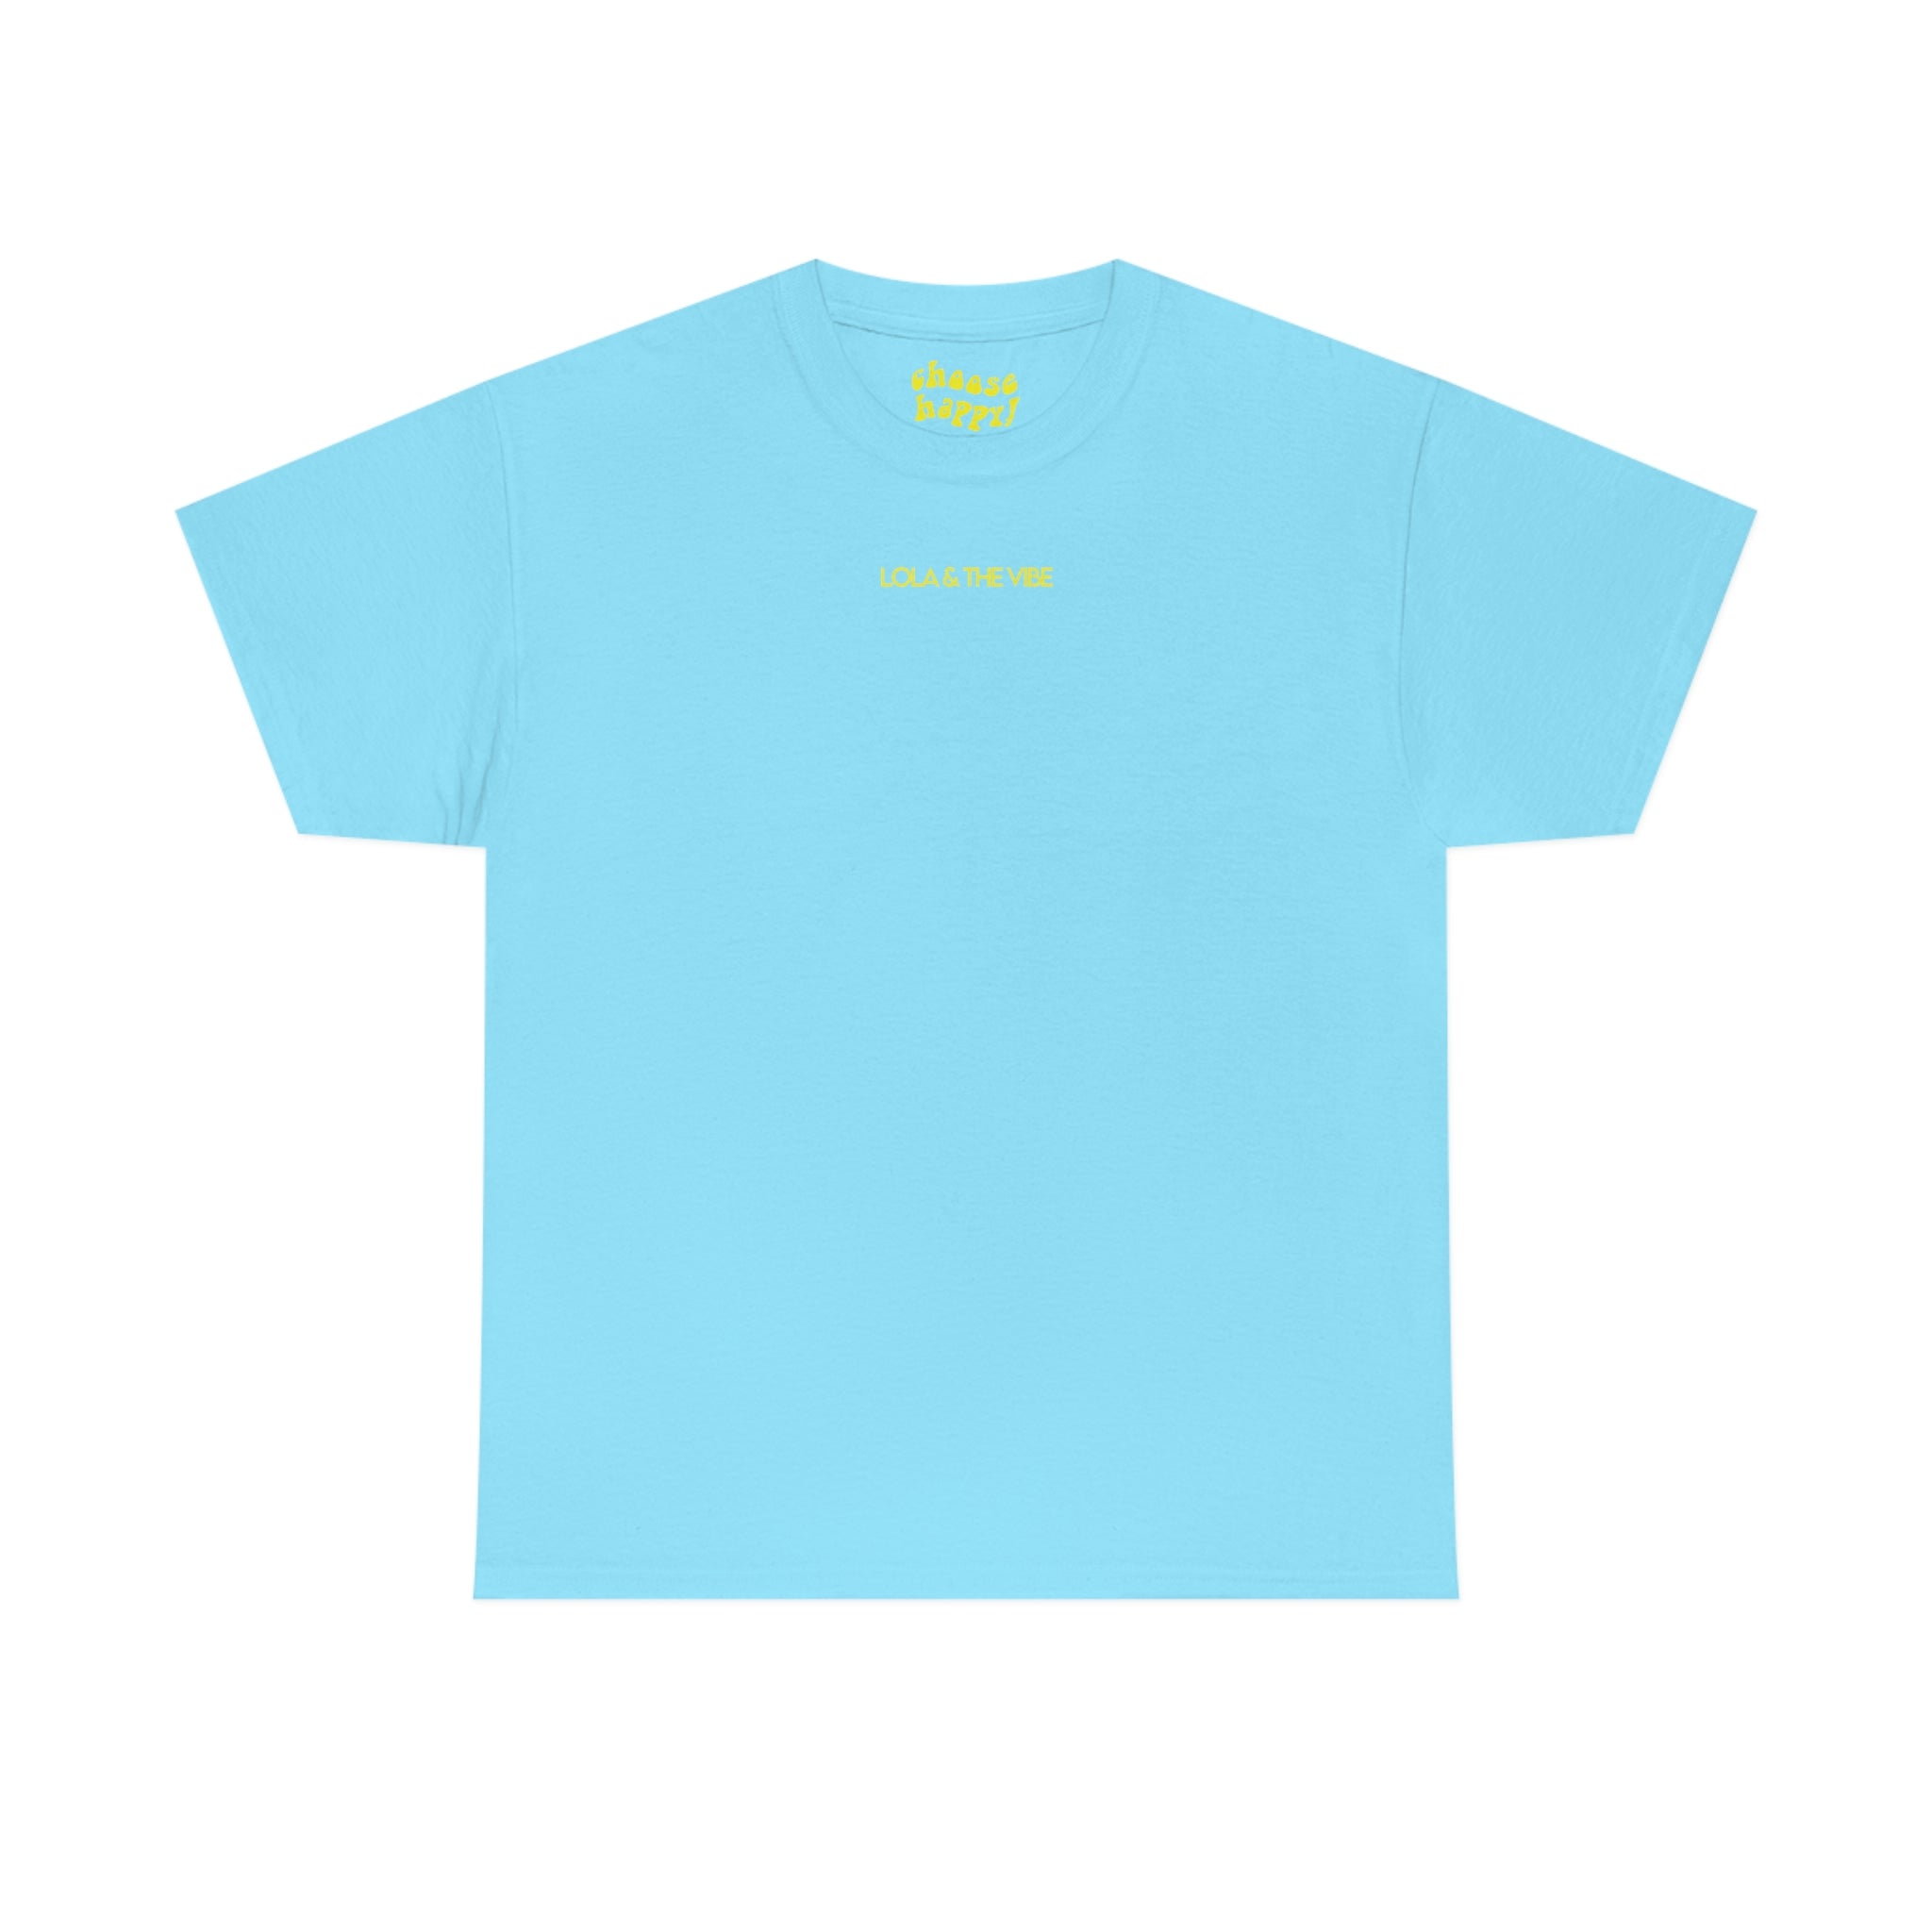 SYLMT Tee - Sky With Yellow